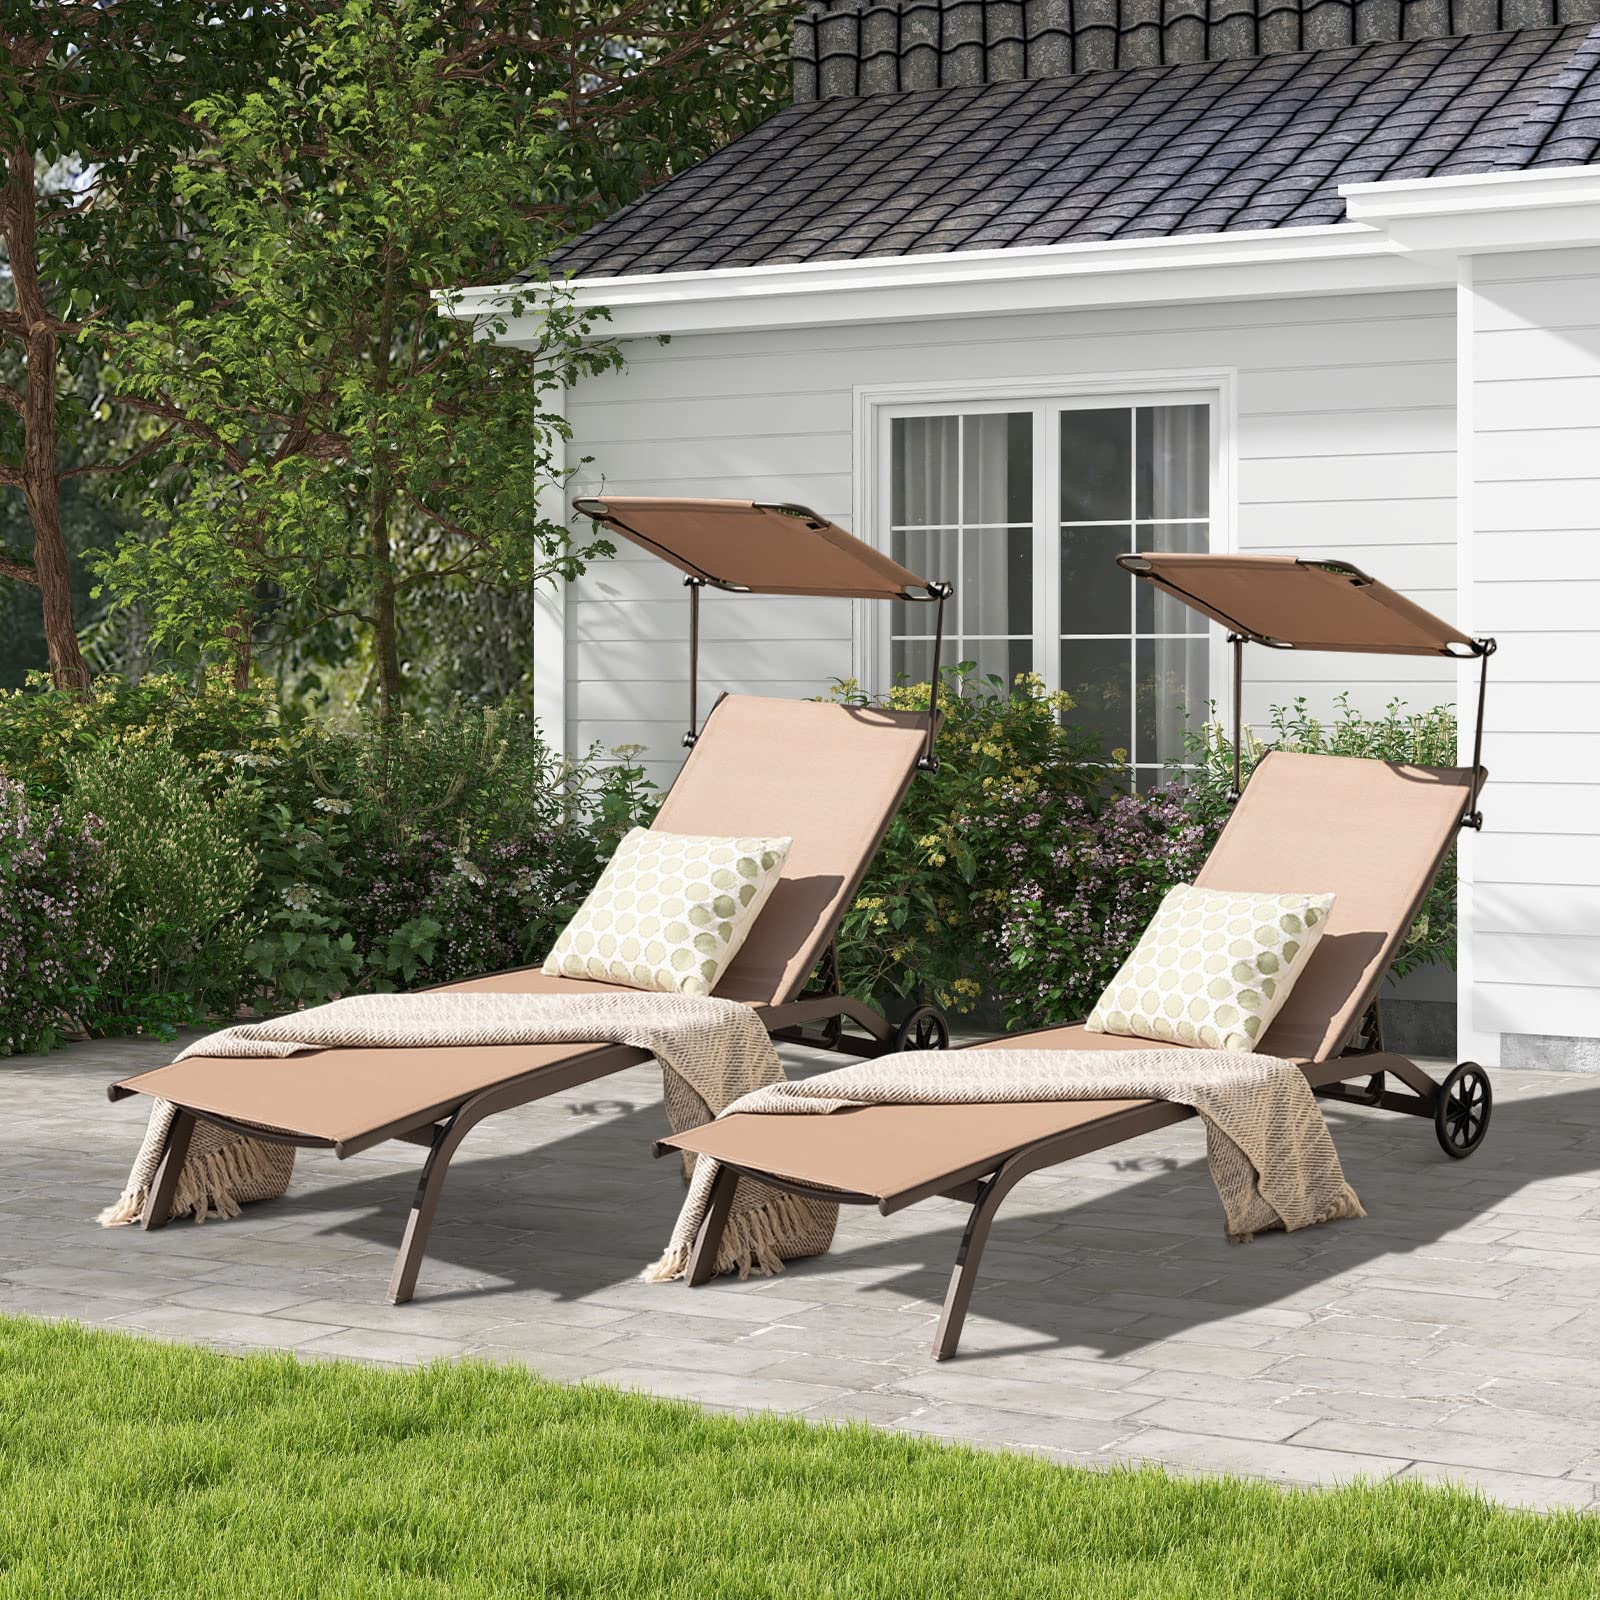 Giantex Outdoor Chaise Lounge Chair, Tanning Chair with Sunshade and Smooth Wheels, 6-Level Adjustable Position